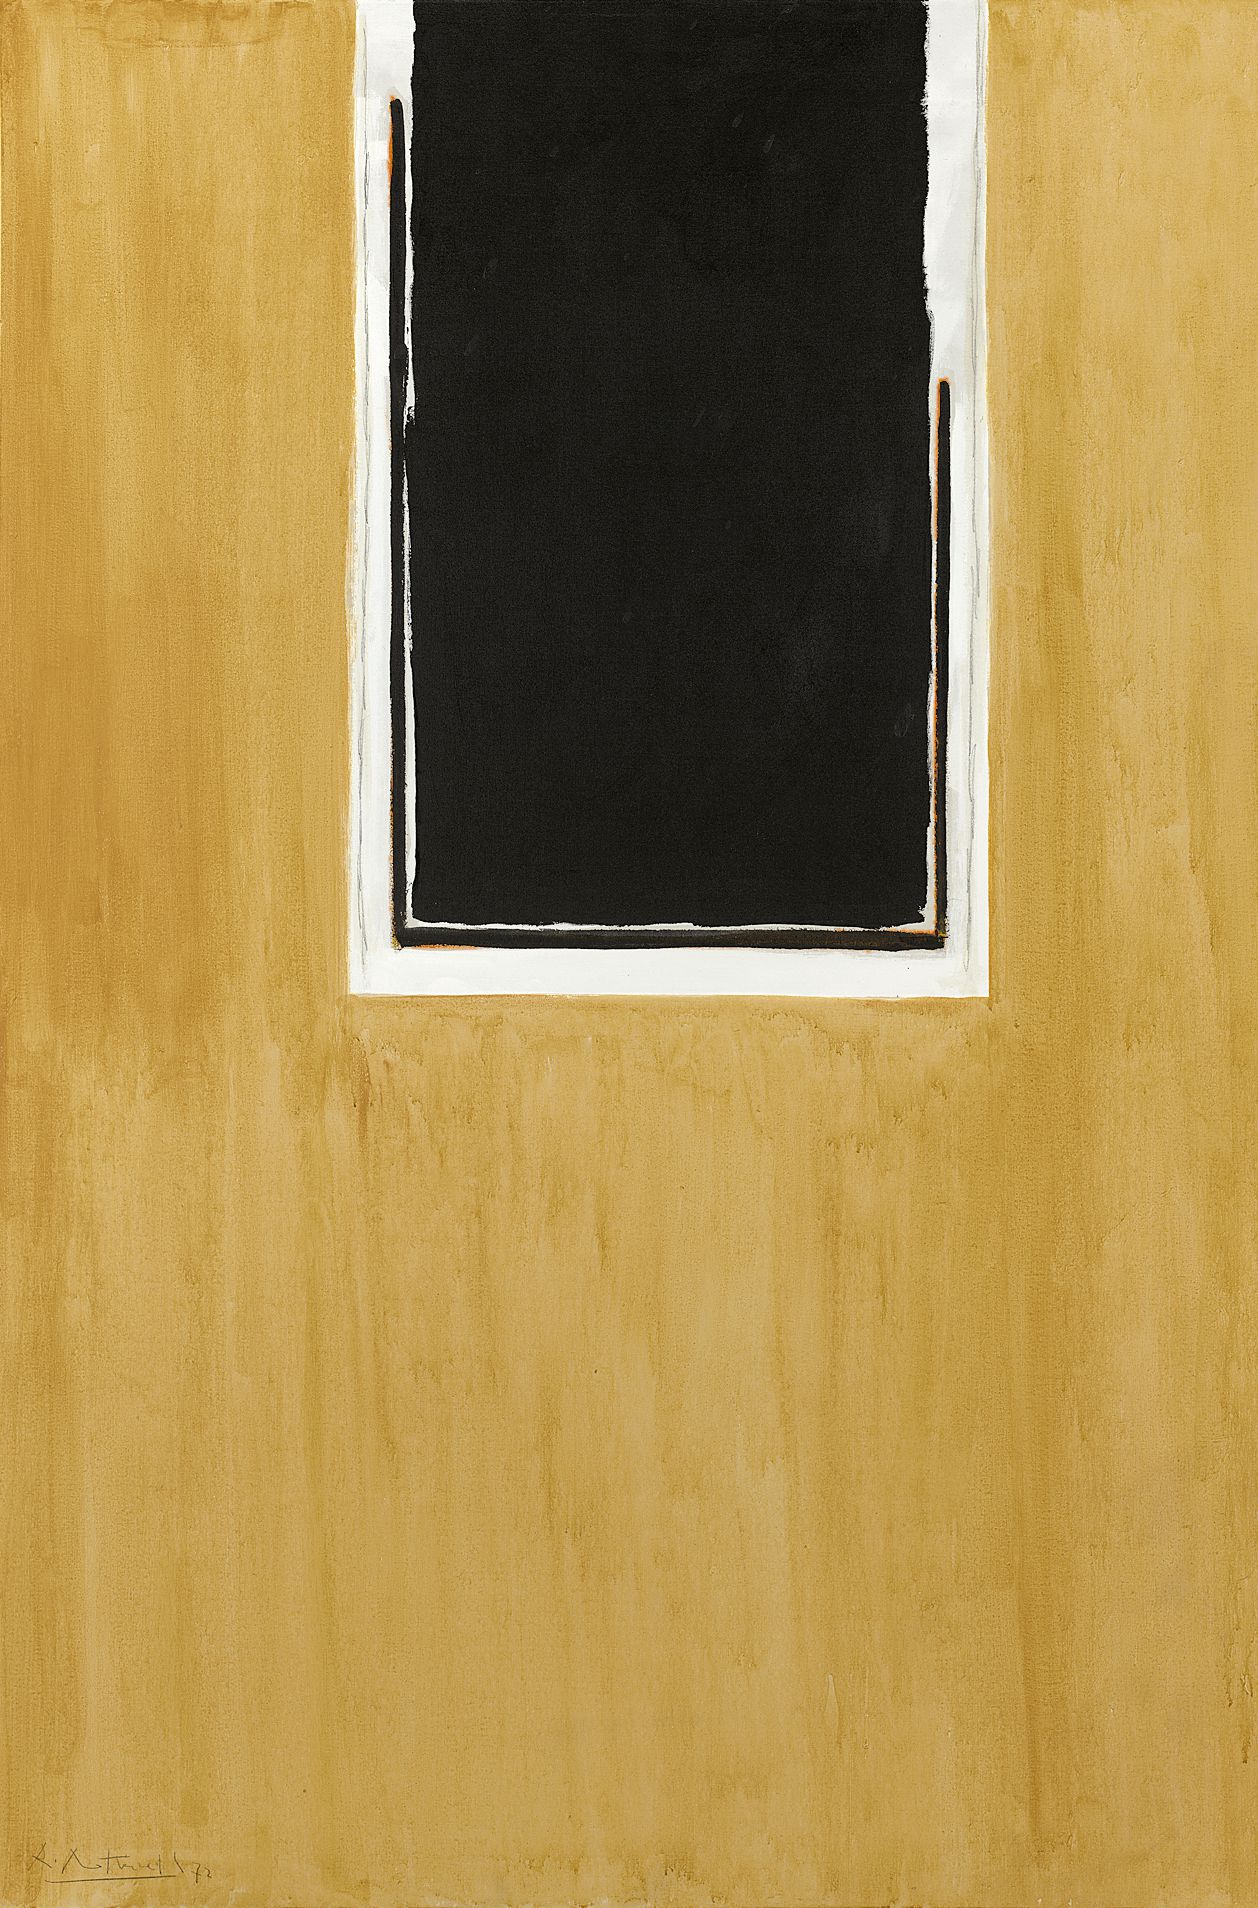 The August Sun and Shadow, 1972. Acrylic and charcoal on canvas, 71 ¾ x 47 ¾ inches (182.2 x 121.3 cm)